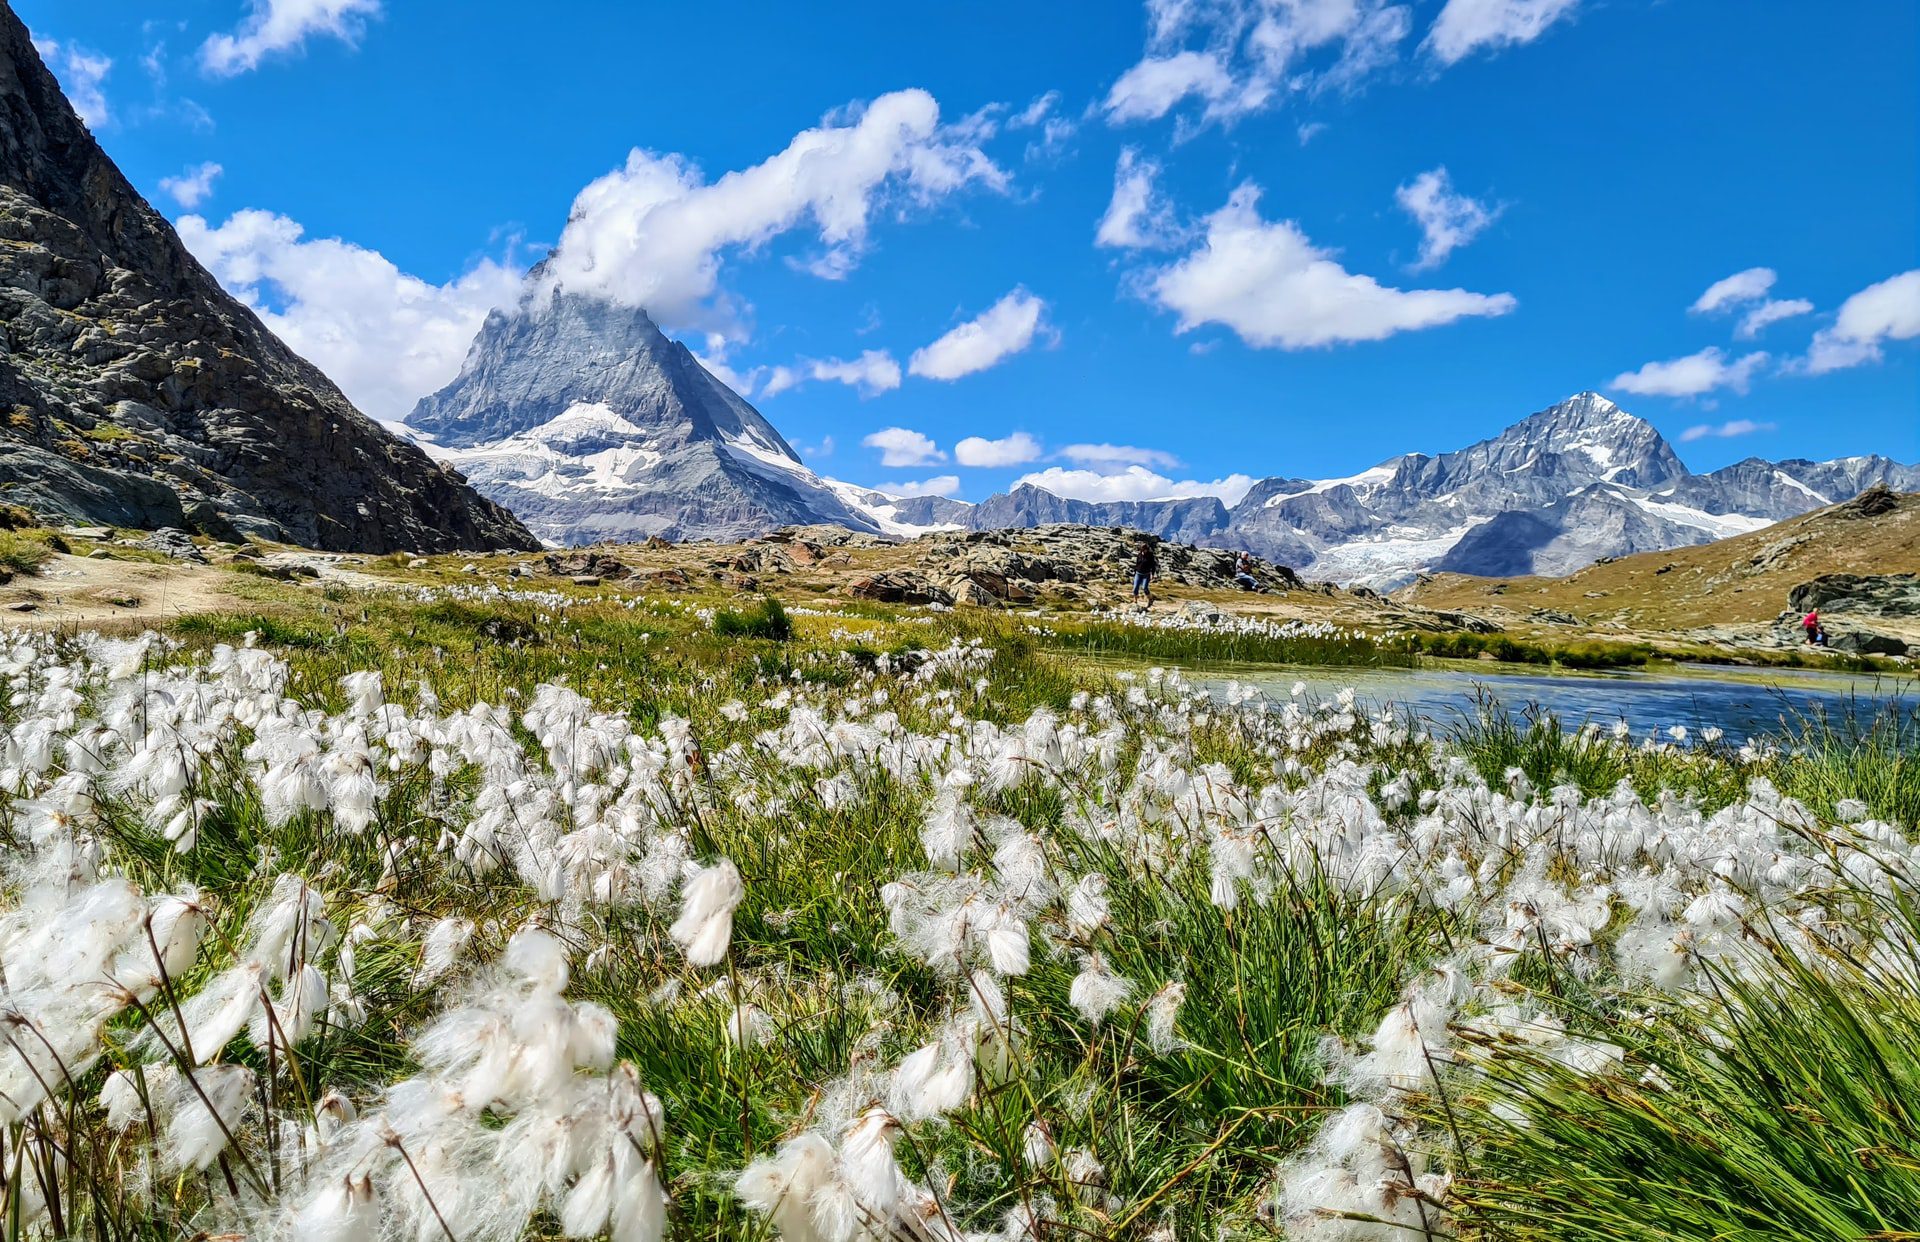 The Alpine region, known for the Matterhorn mountain, expects to welcome 15 percent more Germans and 20 percent more French guests this year. 